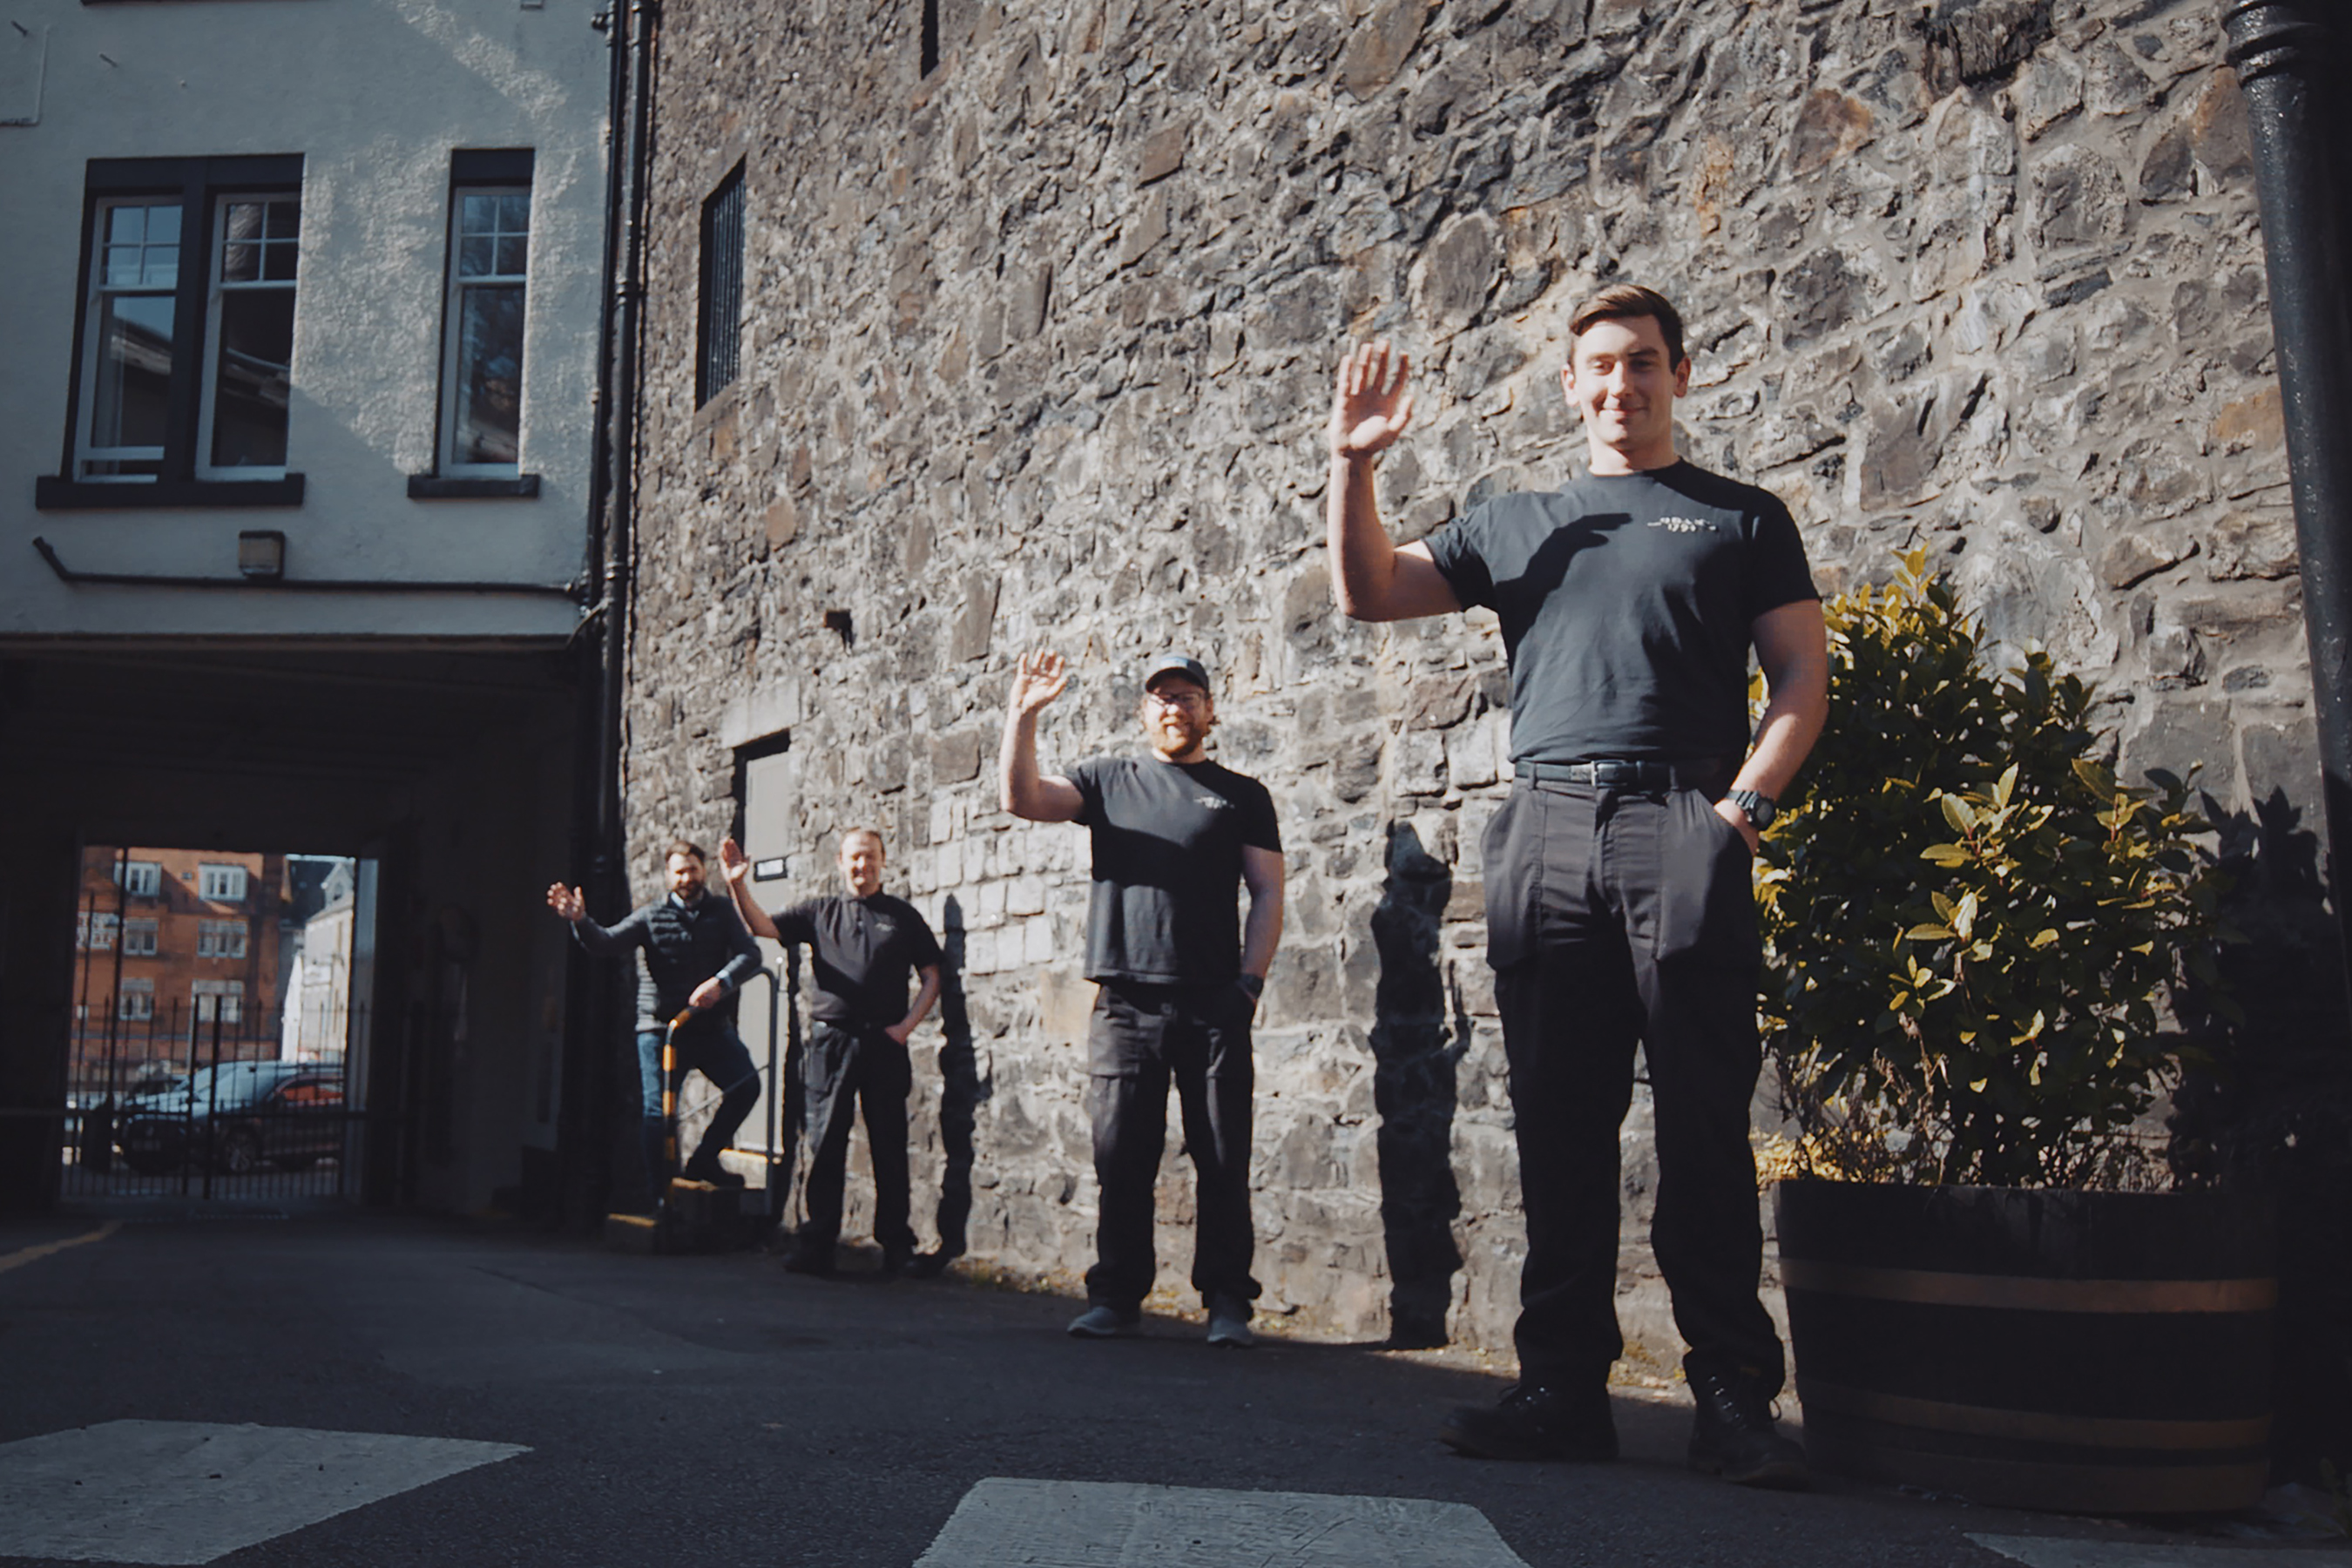 Founded in 1794, the Oban distillery produces incredibly smooth, hand-crafted Single Malt Scotch Whisky. Oban is made by only seven workers - meaning every drop of whisky is made by 14 hands.